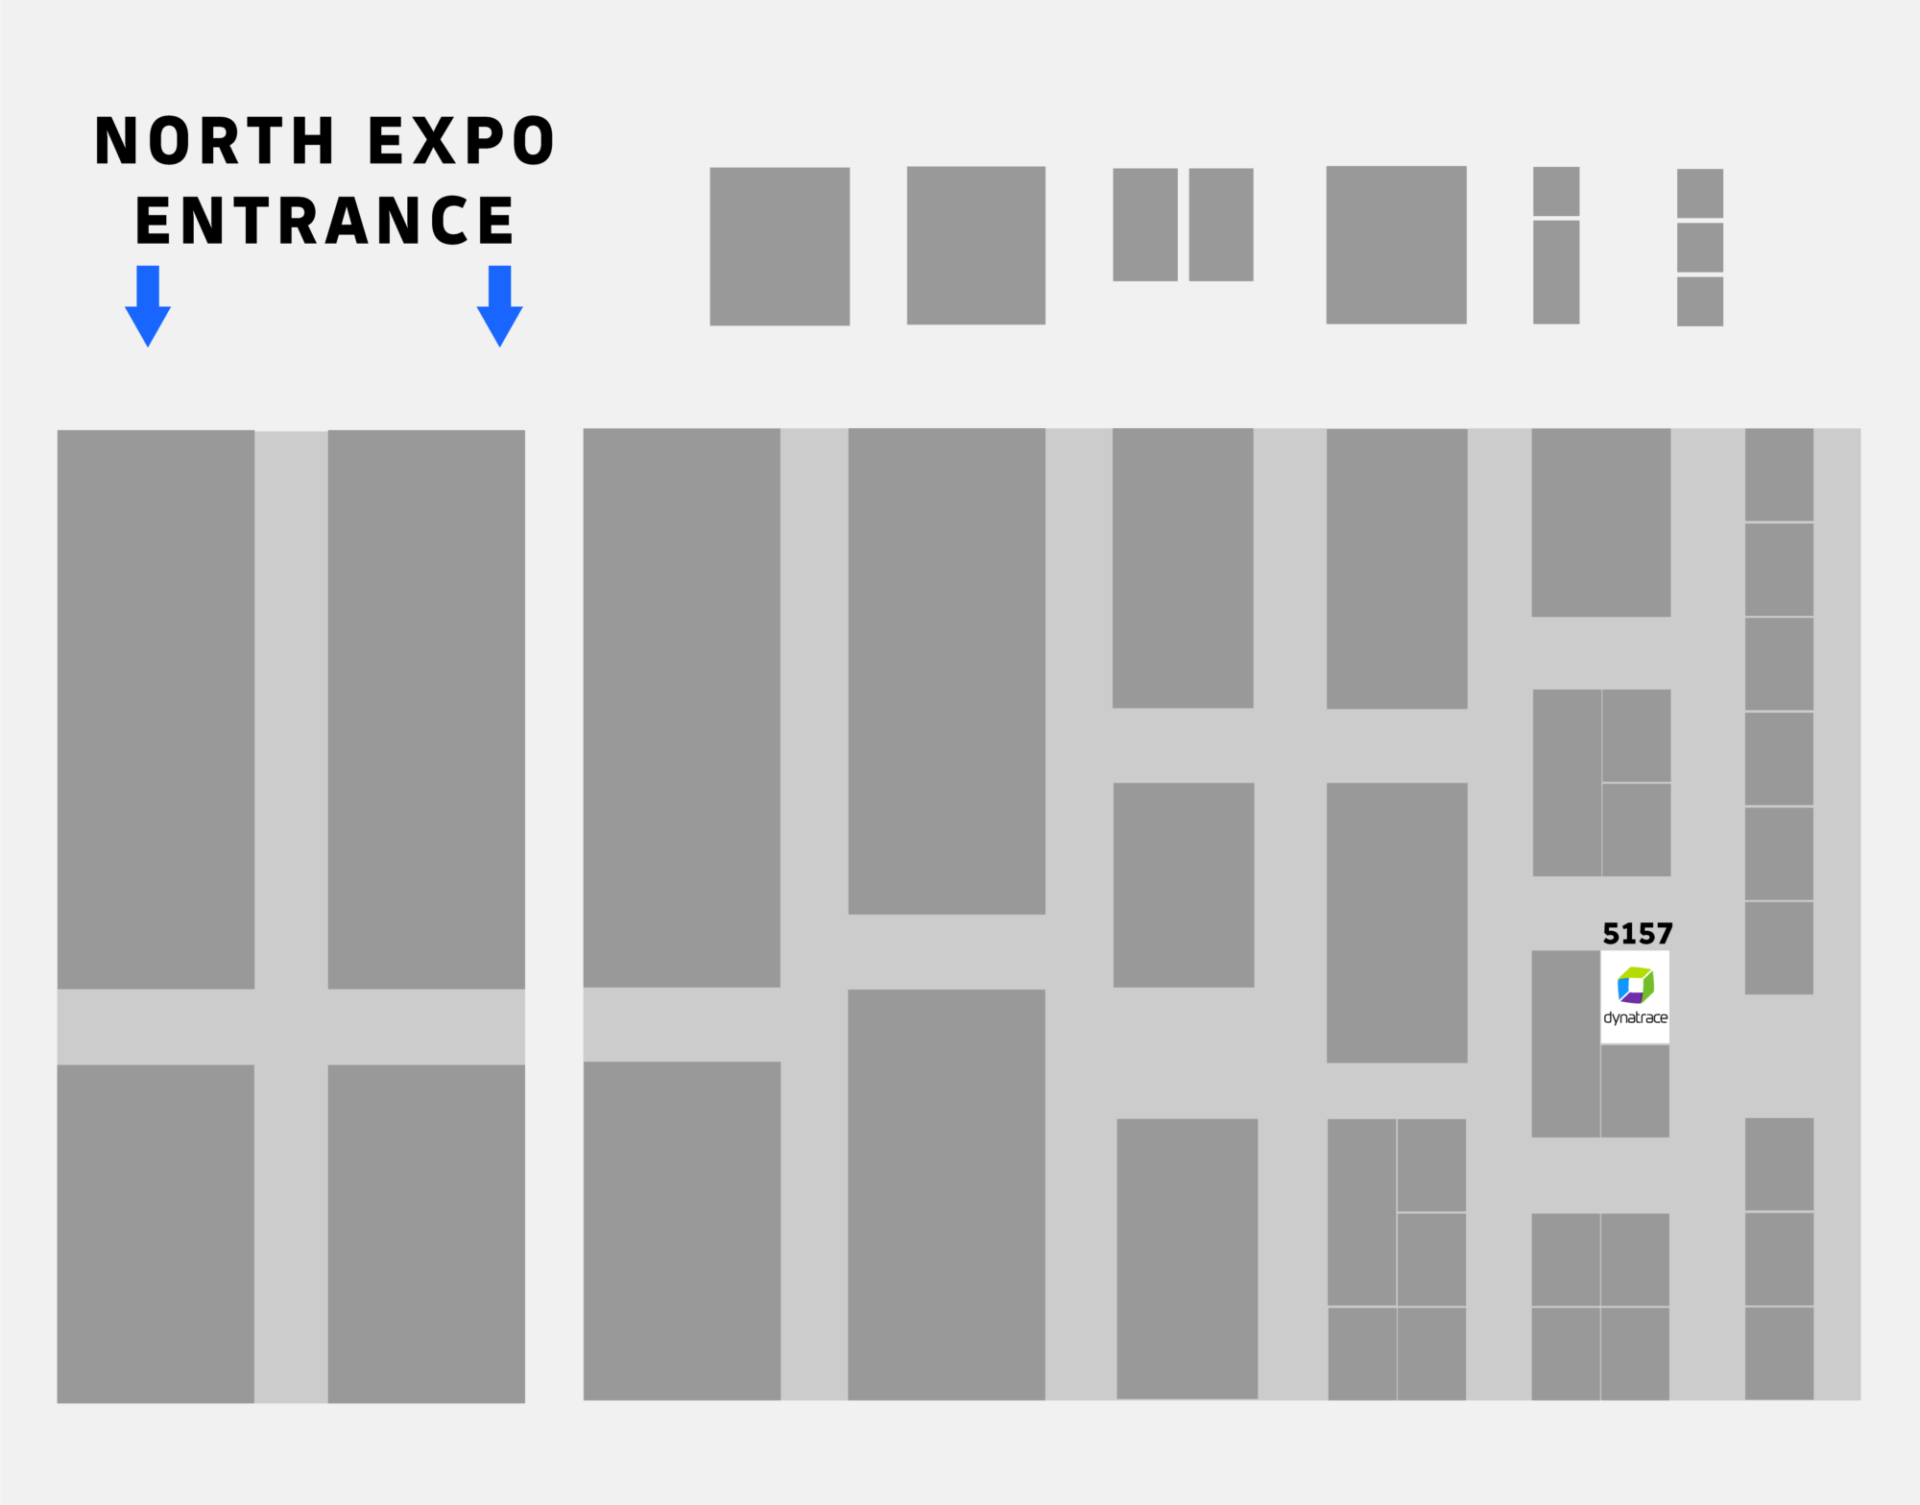 BAE12064 ILL RSA EXPO Floor Plans DT Locations North FINAL